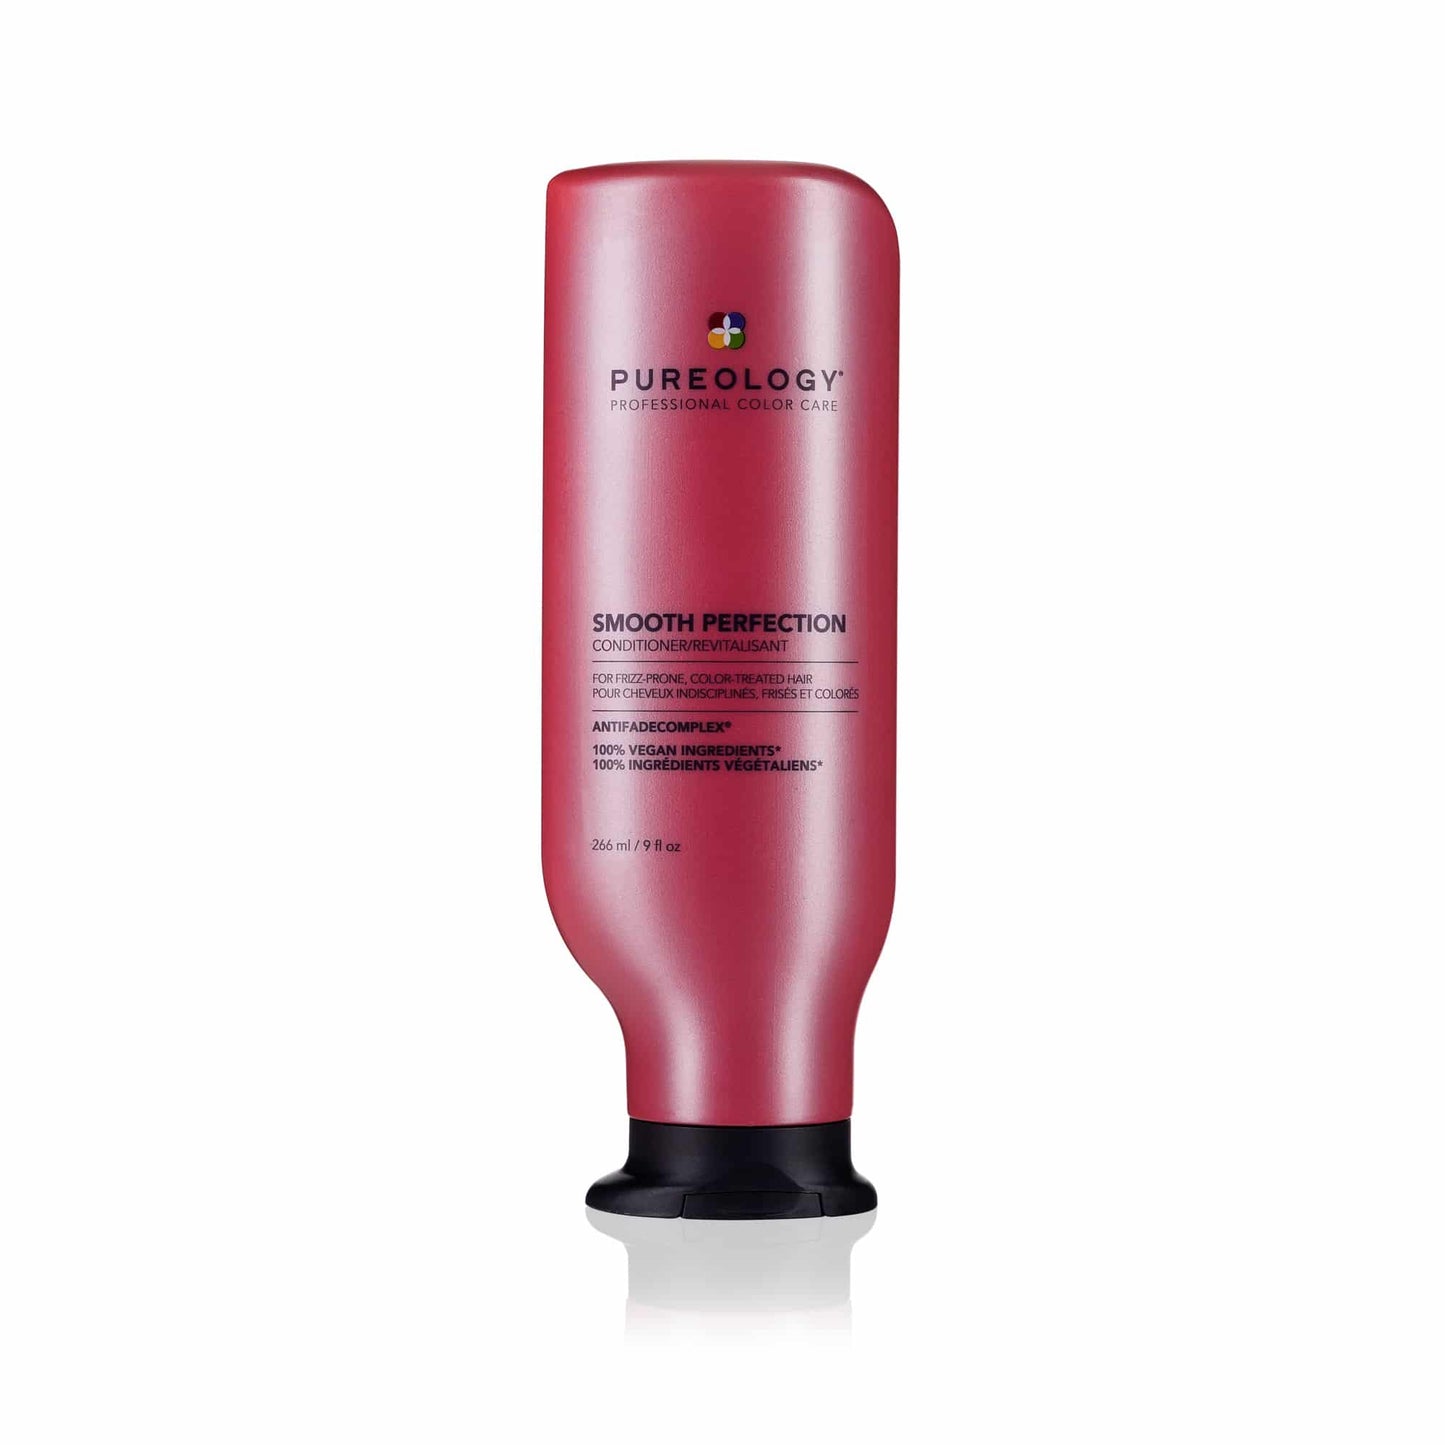 Pureology Smooth Perfection Conditioner - 266ml